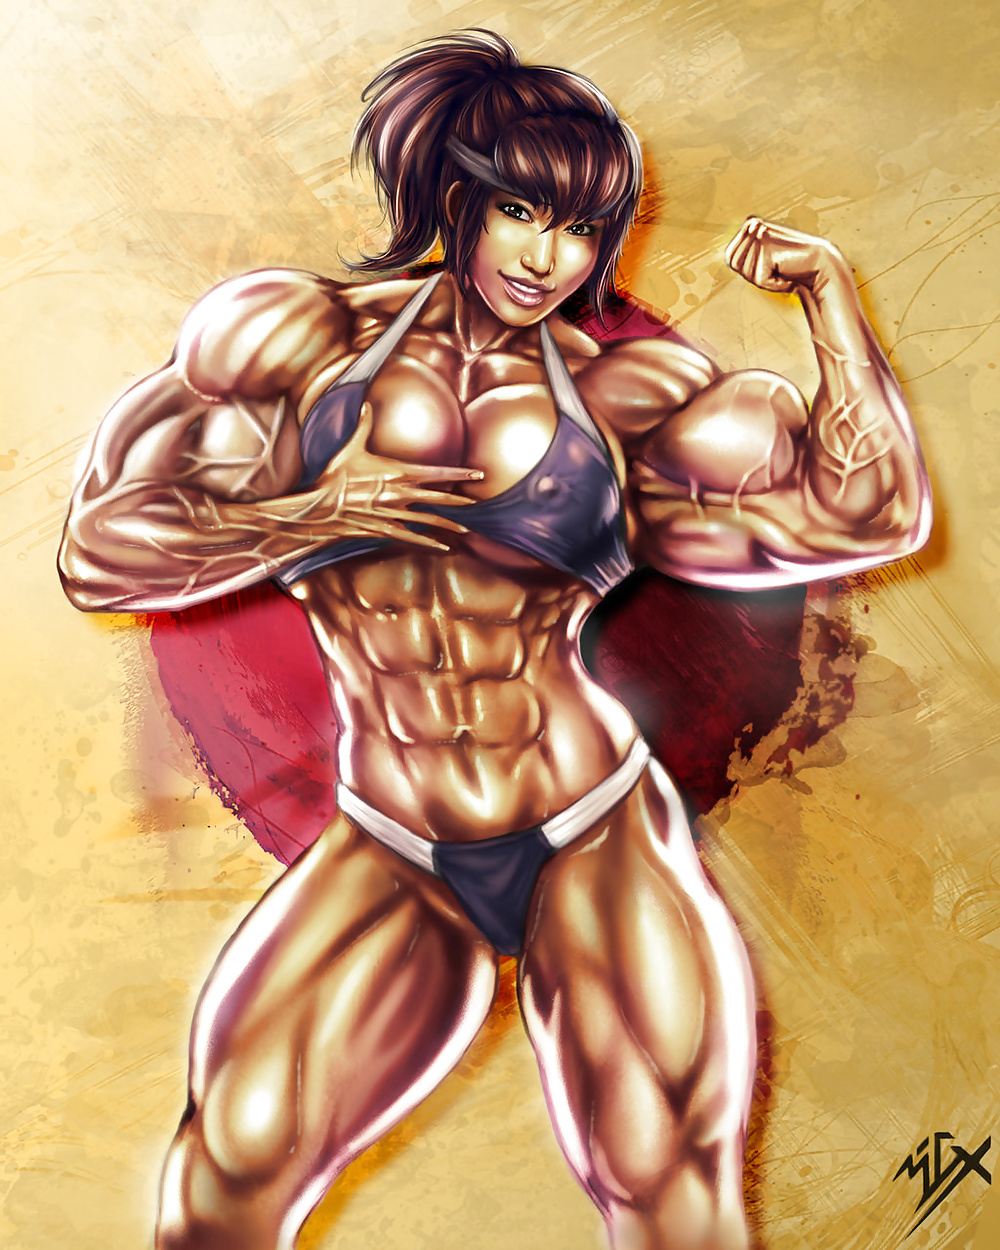 3D and Animated FBB (Huge unnatural muscles) (2/33)